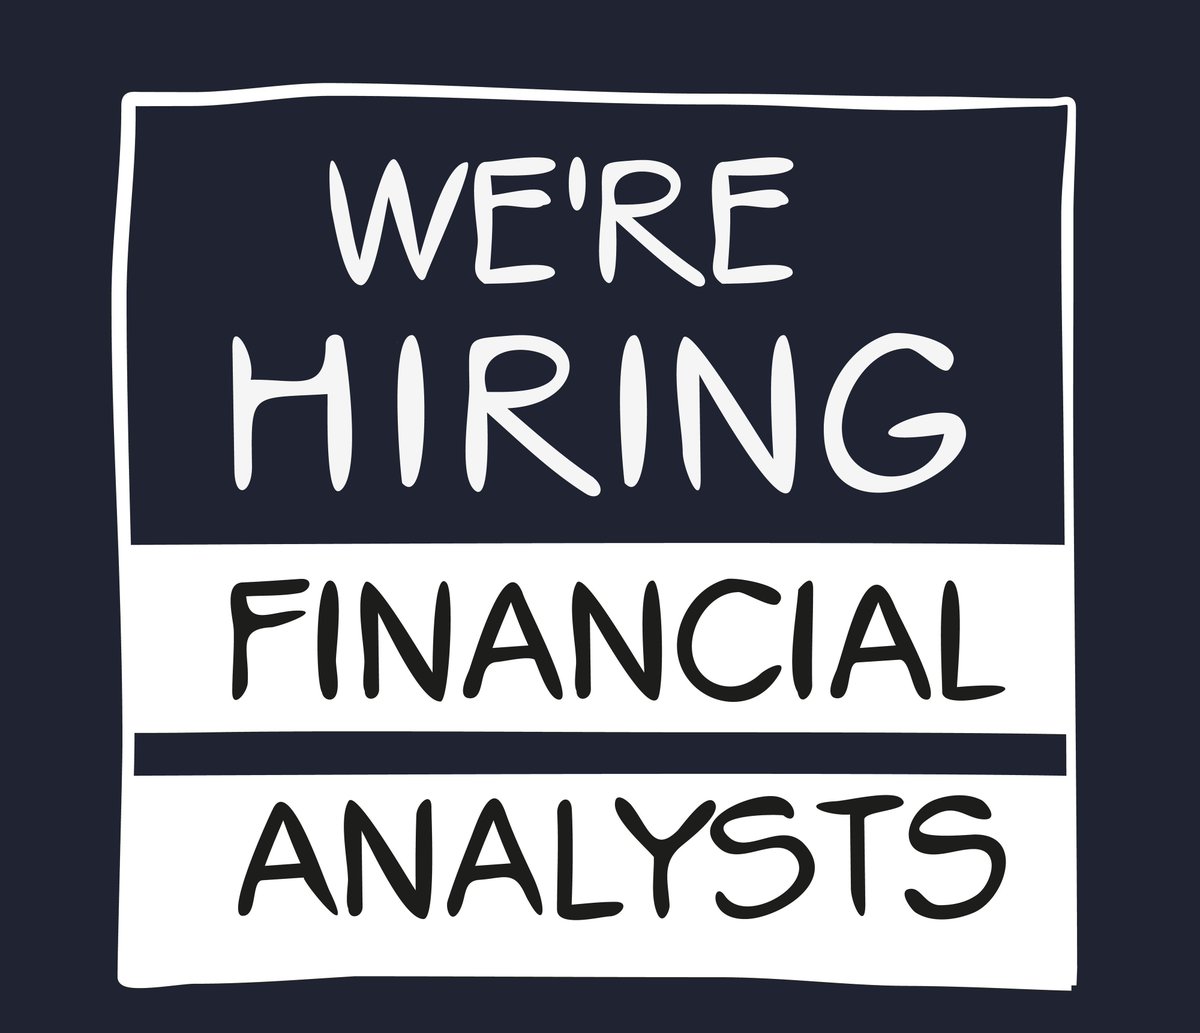 #JobScoopAt2 JOIN THIS DYNAMIC AND RESPECTED ORGANIZATION! 

Senior Financial Analyst, Salary: $90,000 - $100,000 

If you have excellent business partnering and analytical abilities - apply now!

 #Ottawa #Finance #Jobs #OttJobs
buff.ly/2QnBklE